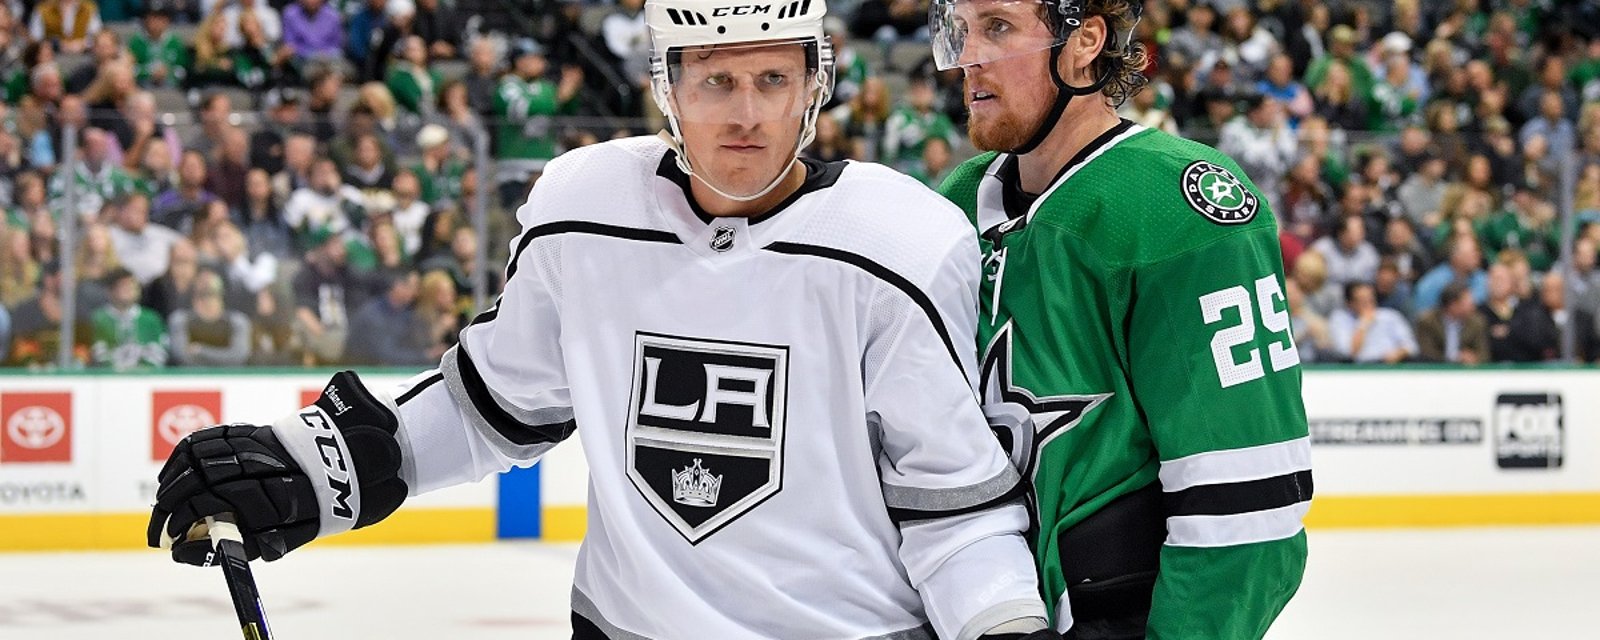 Phaneuf responds to being a healthy scratch for the first time in his NHL career.